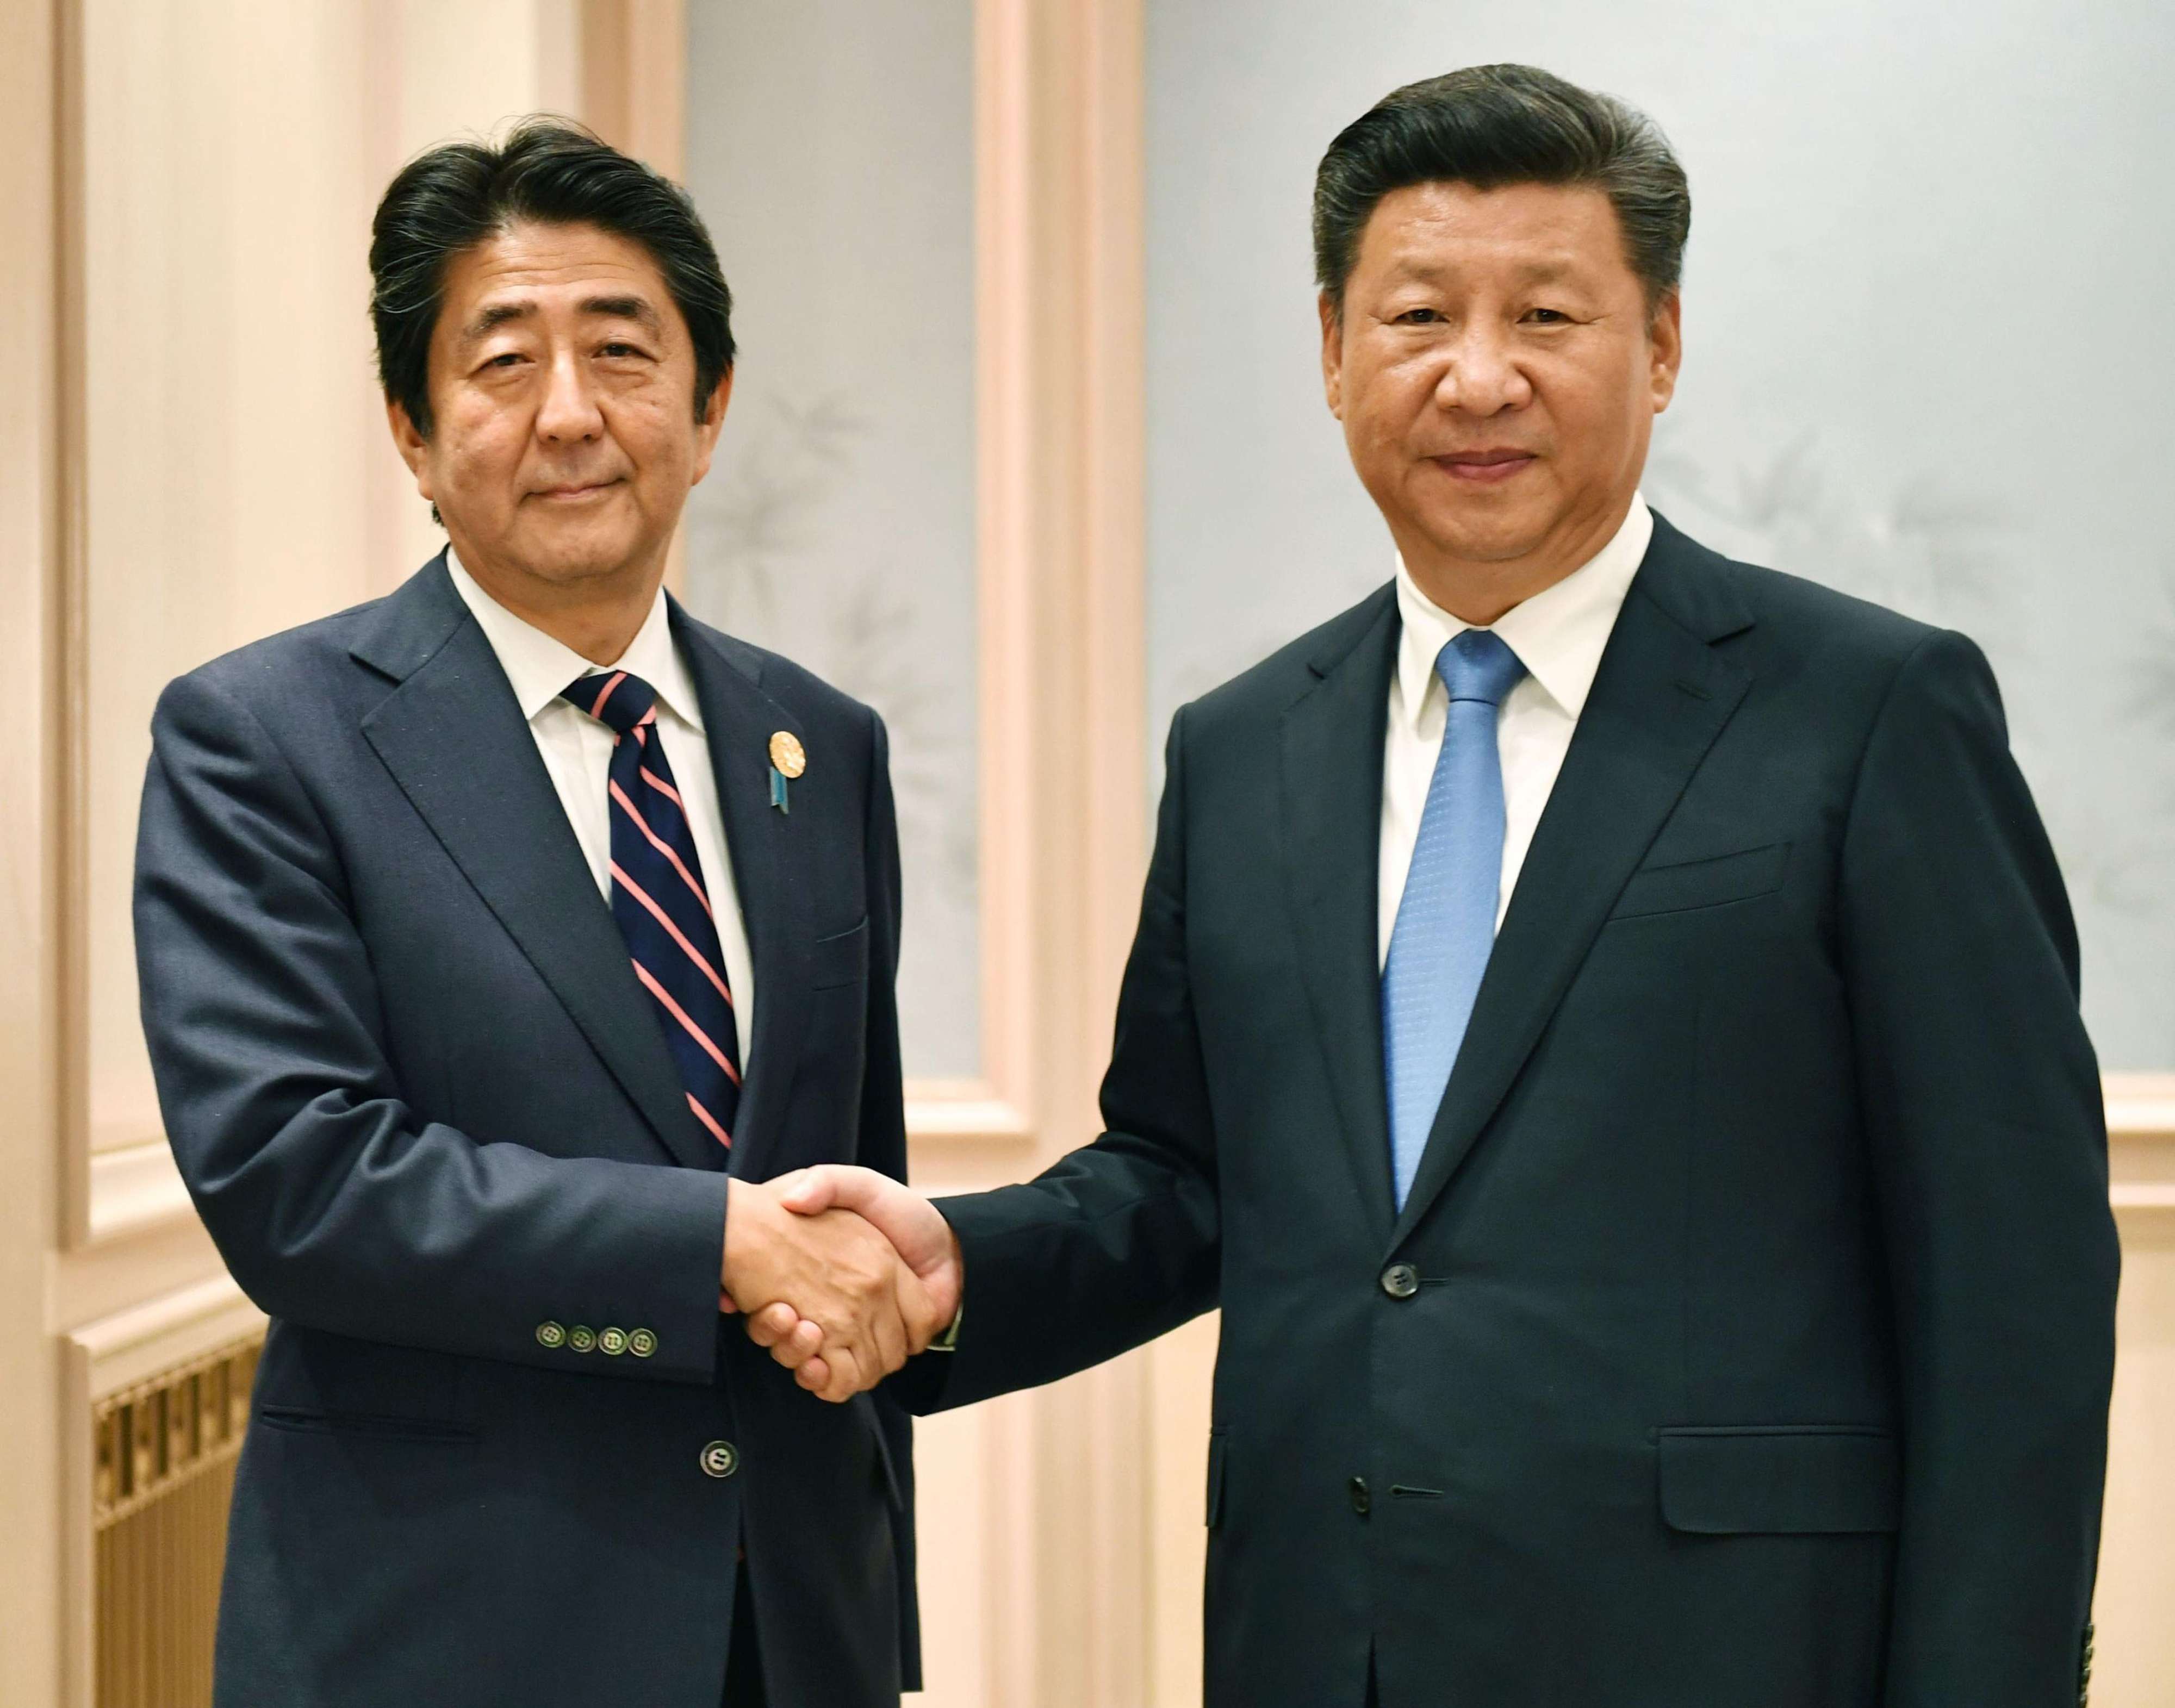 President Xi Jinping, right, and Japanese Prime Minister Shinzo Abe shake hands before their bilateral meeting on the sideline of the G-20 Summit on Monday. Photo: Kyodo